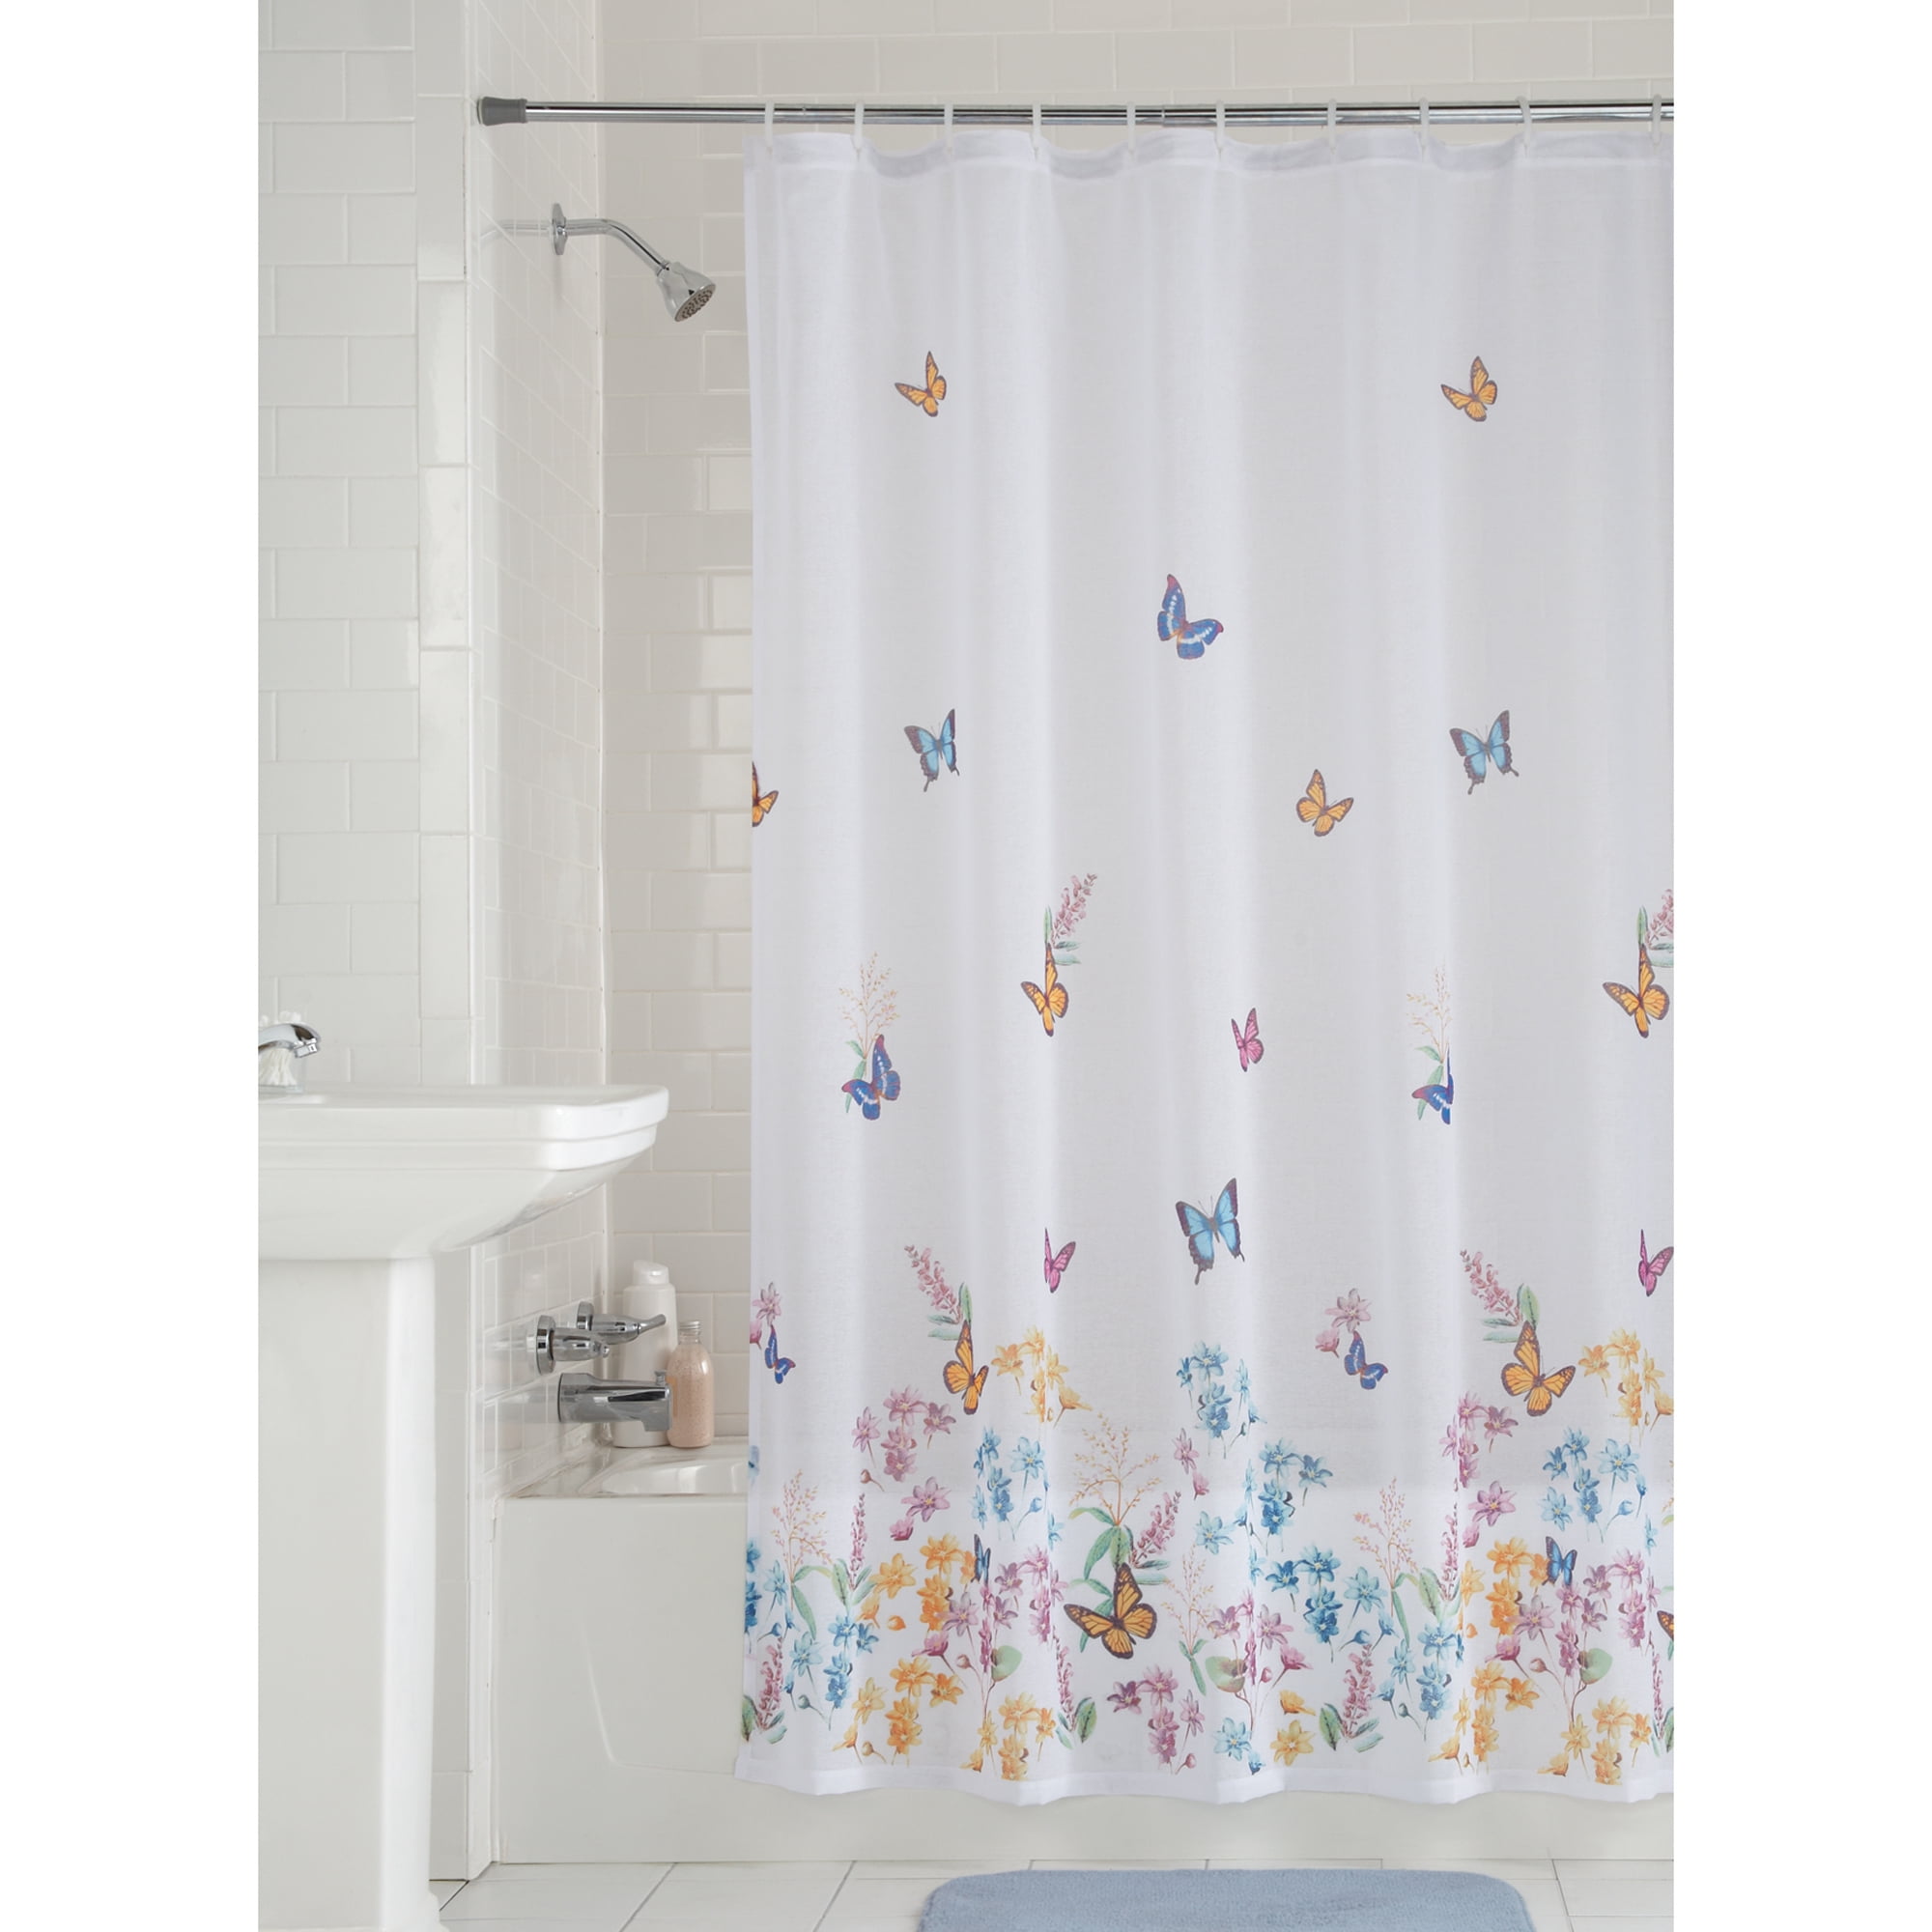 Multicolor Fabric Shower Curtain 70 X, Sheer Top Fabric Shower Curtain